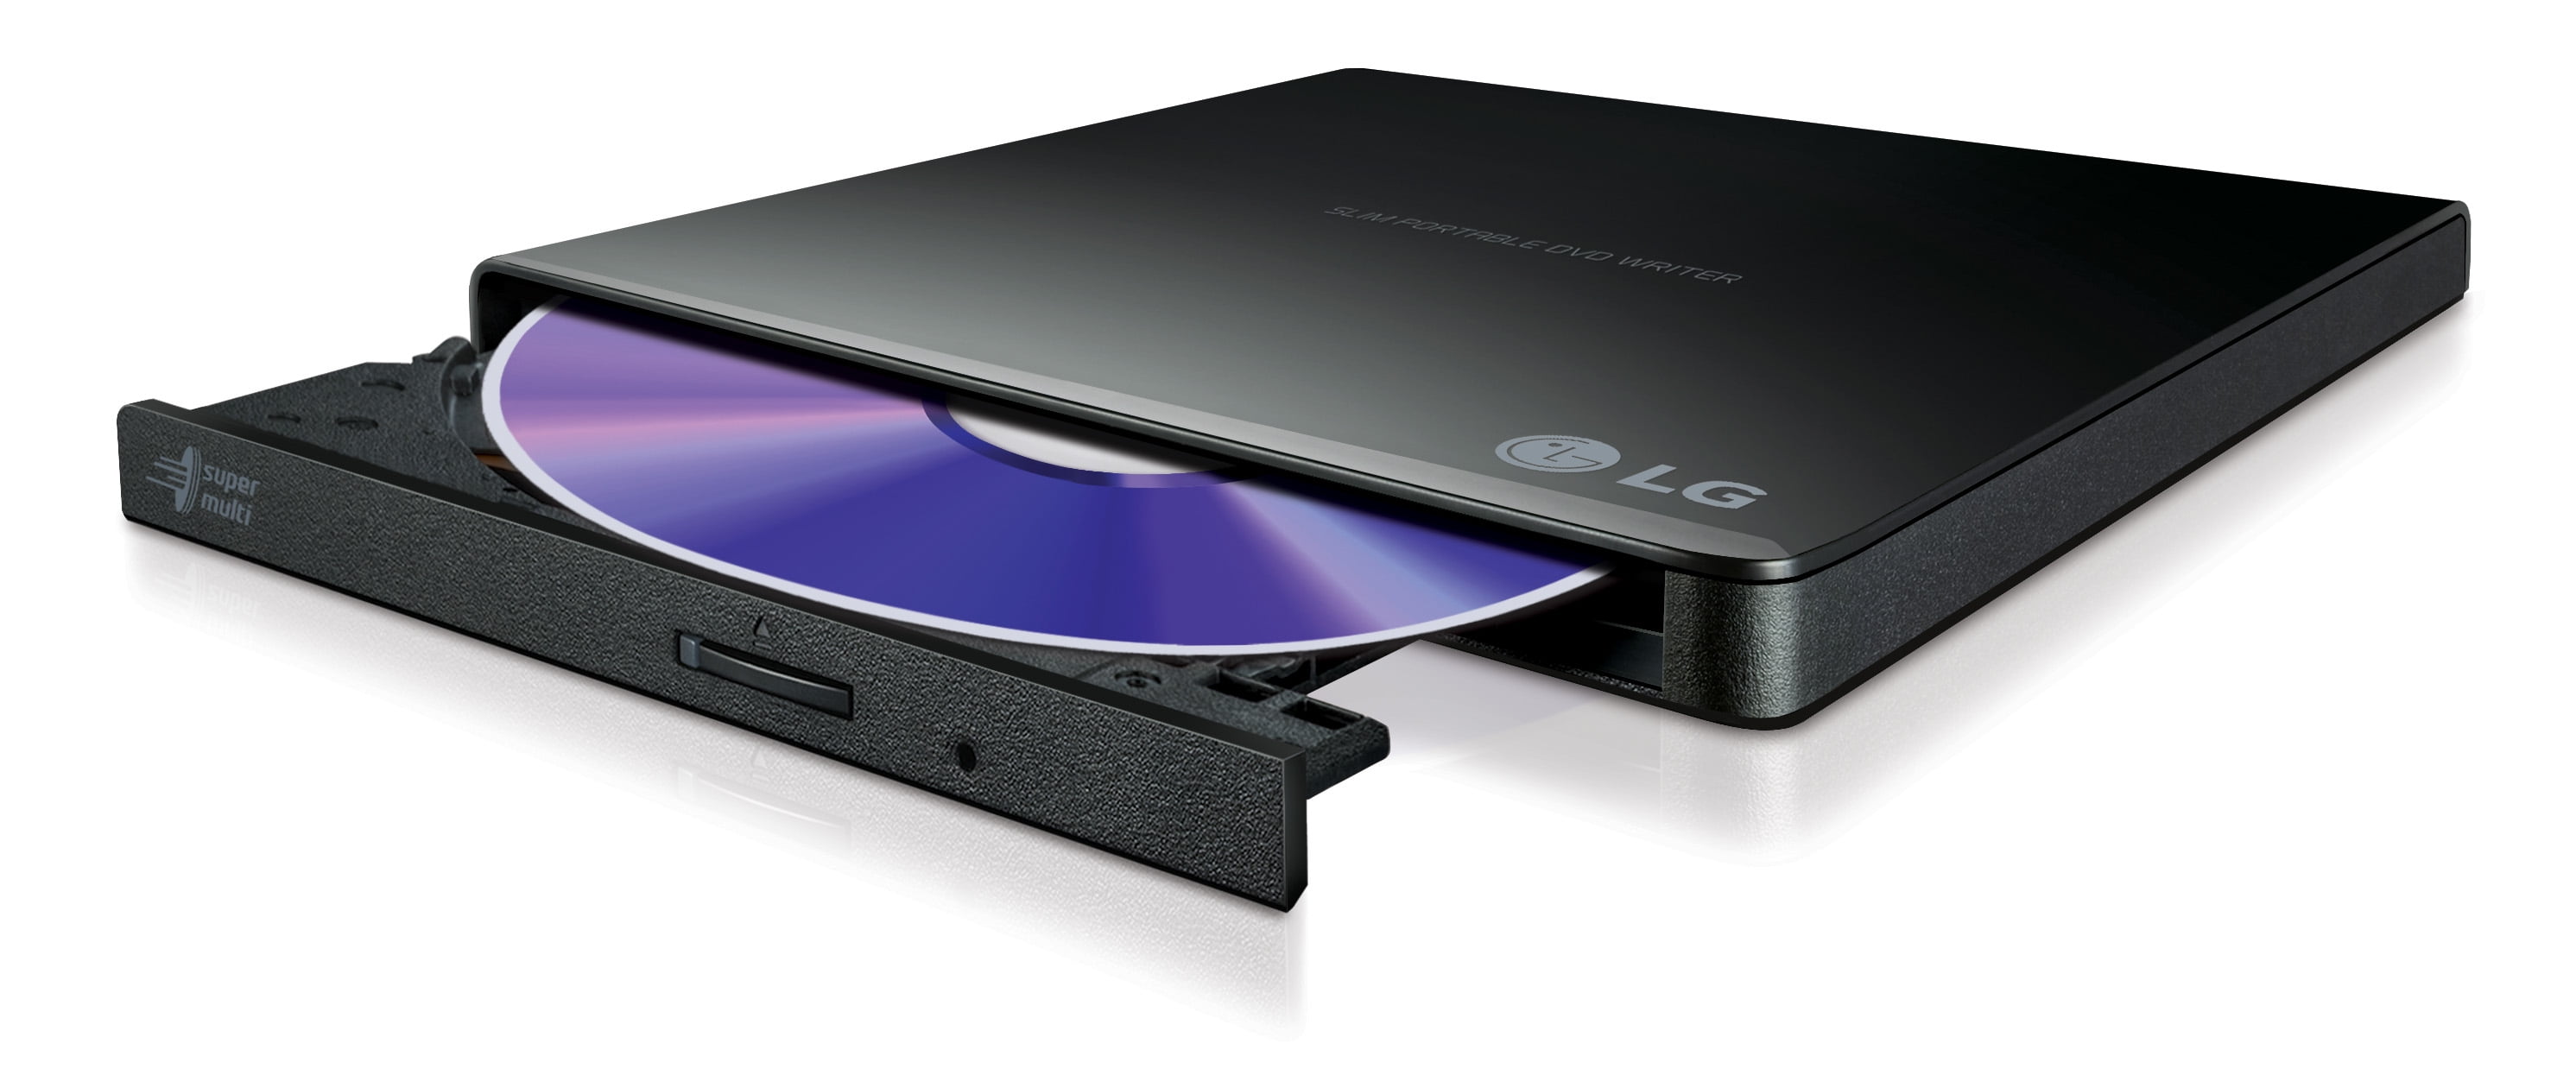 LG Ultra Slim Portable DVD Writer with M-DISC Support - GP63EX70